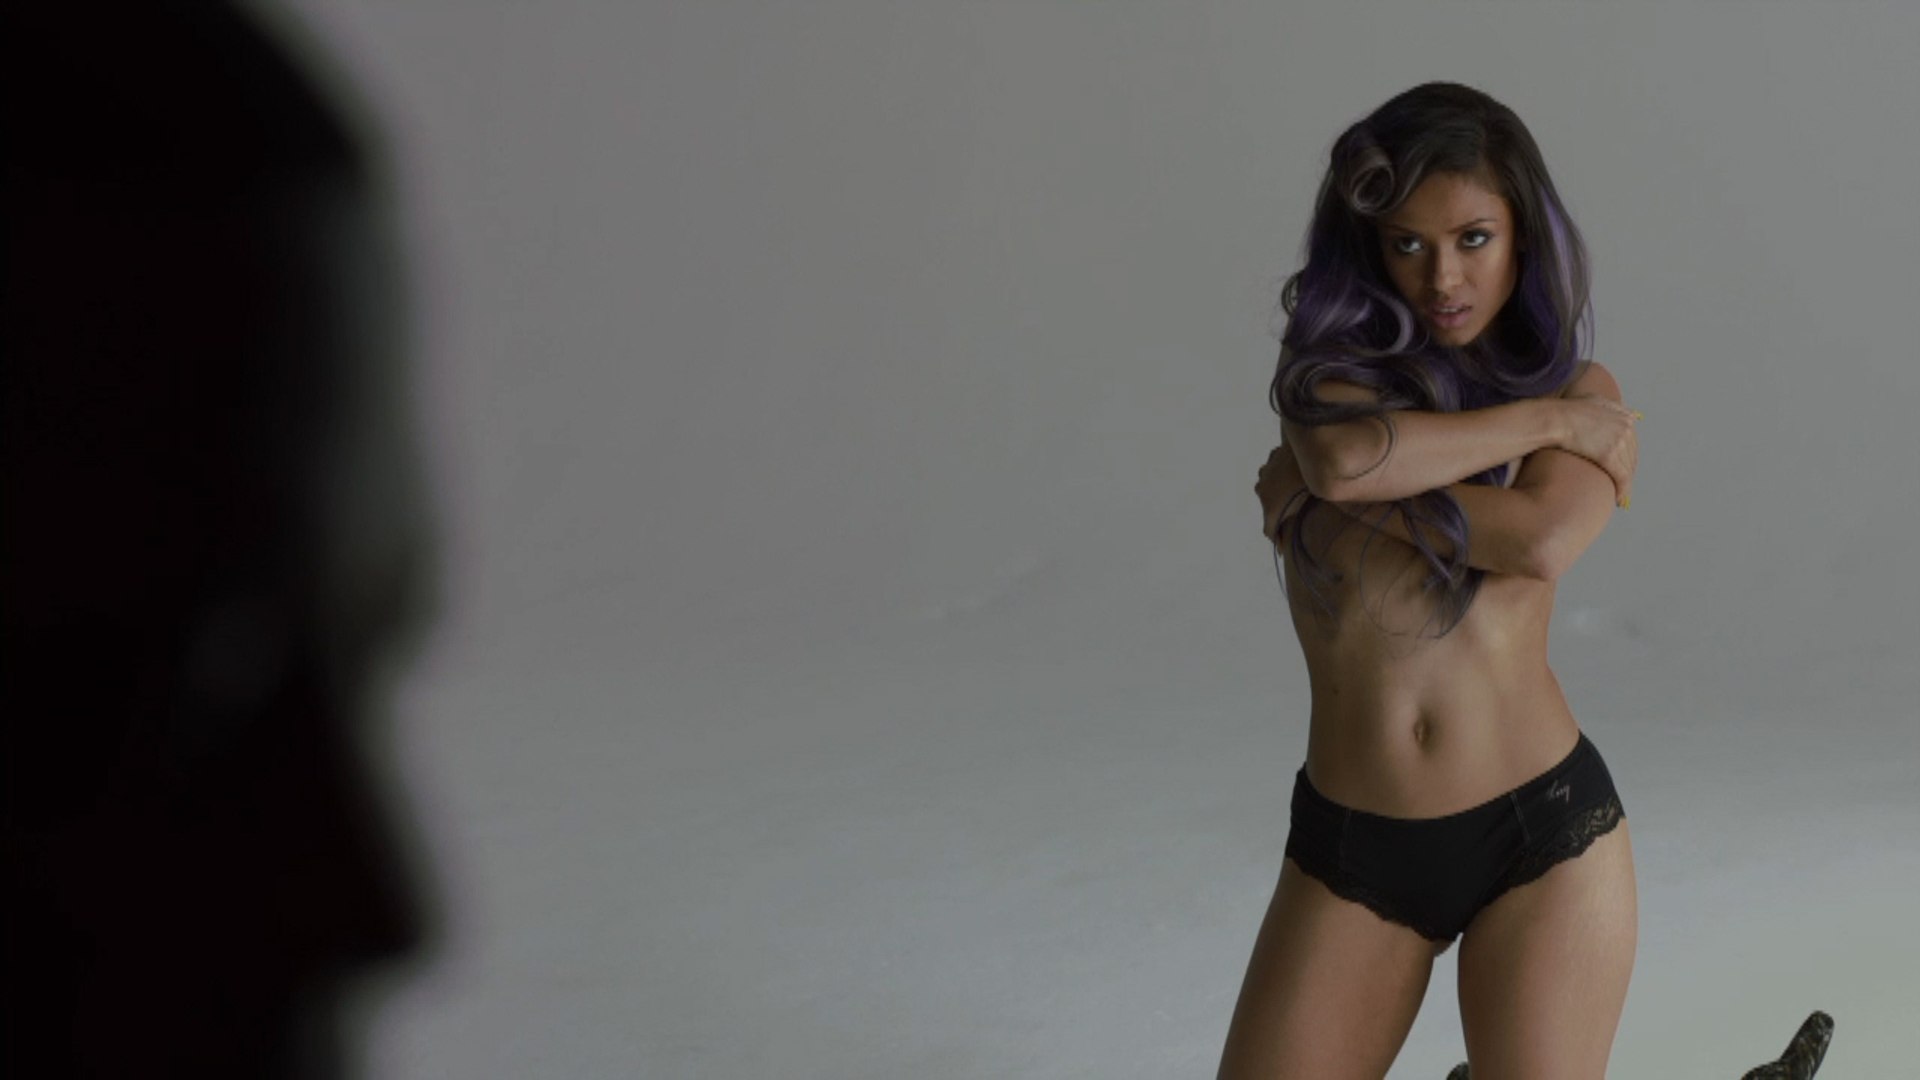 A Sultry Photoshoot In A Scene From 'Beyond The Lights' - video Dailymotion